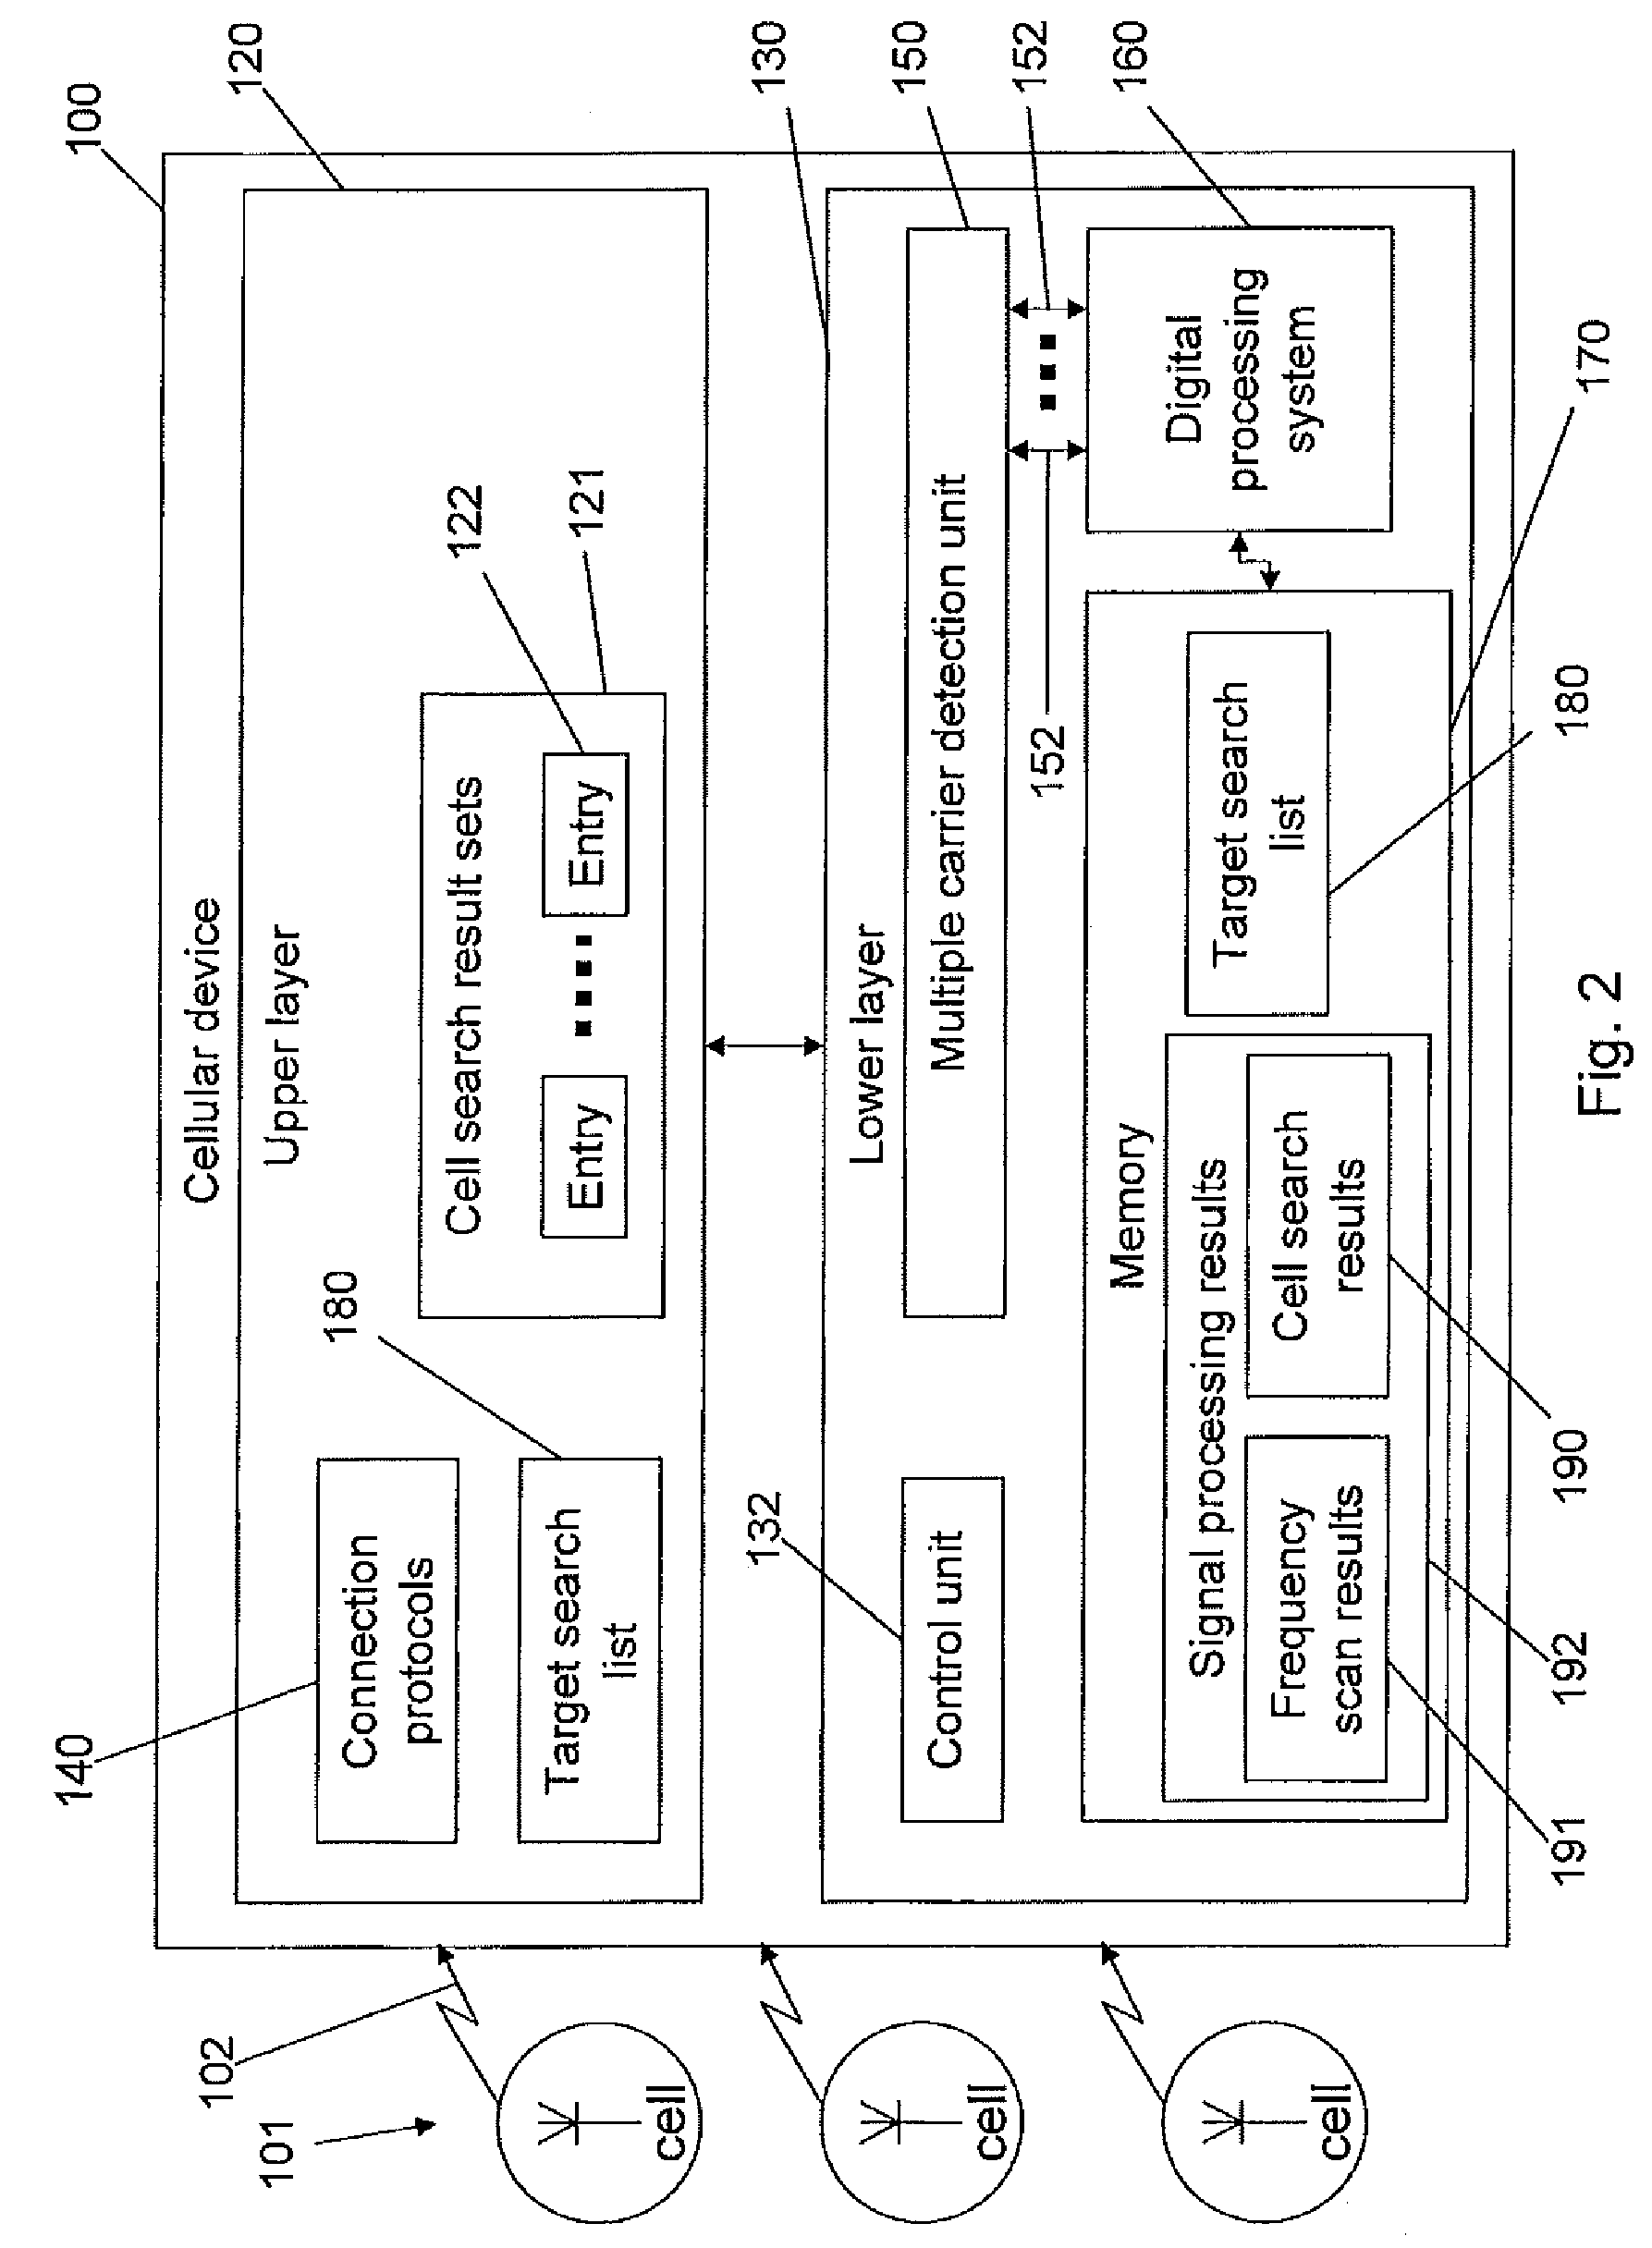 System and method for time saving cell search for mobile devices in single and multiple radio technology communication systems